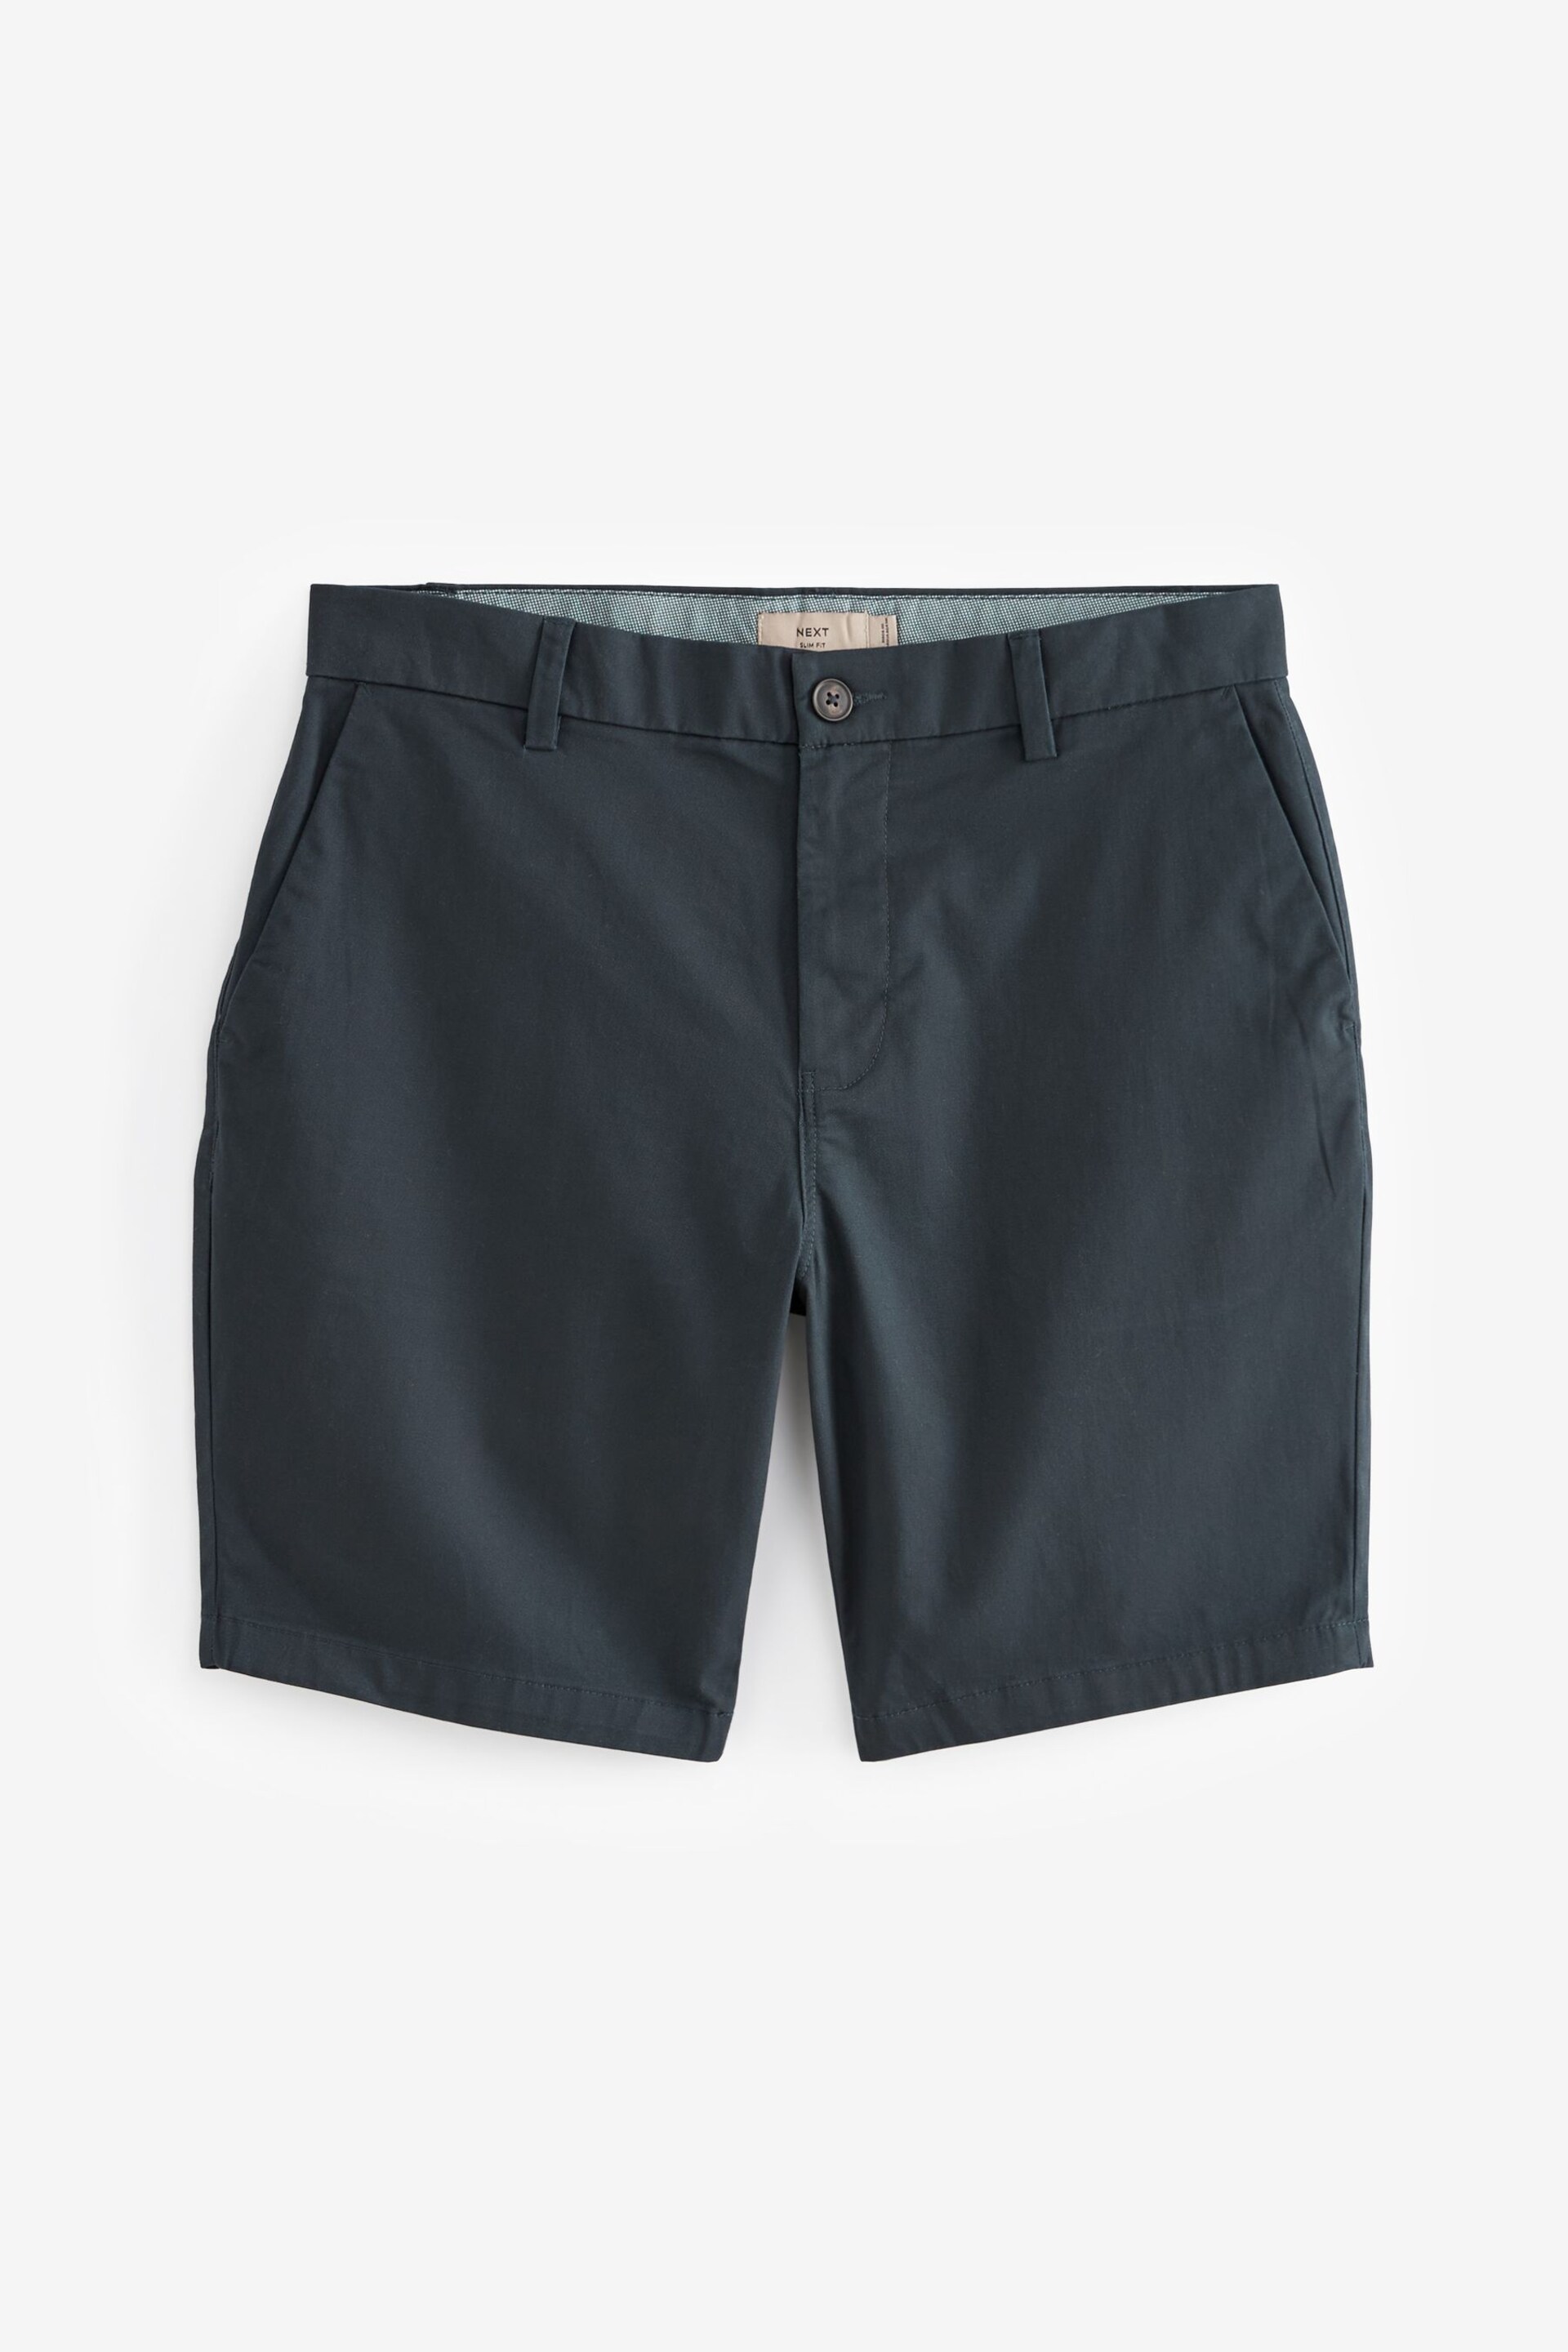 Navy/Stone Slim Fit Stretch Chinos Shorts 2 Pack - Image 11 of 17